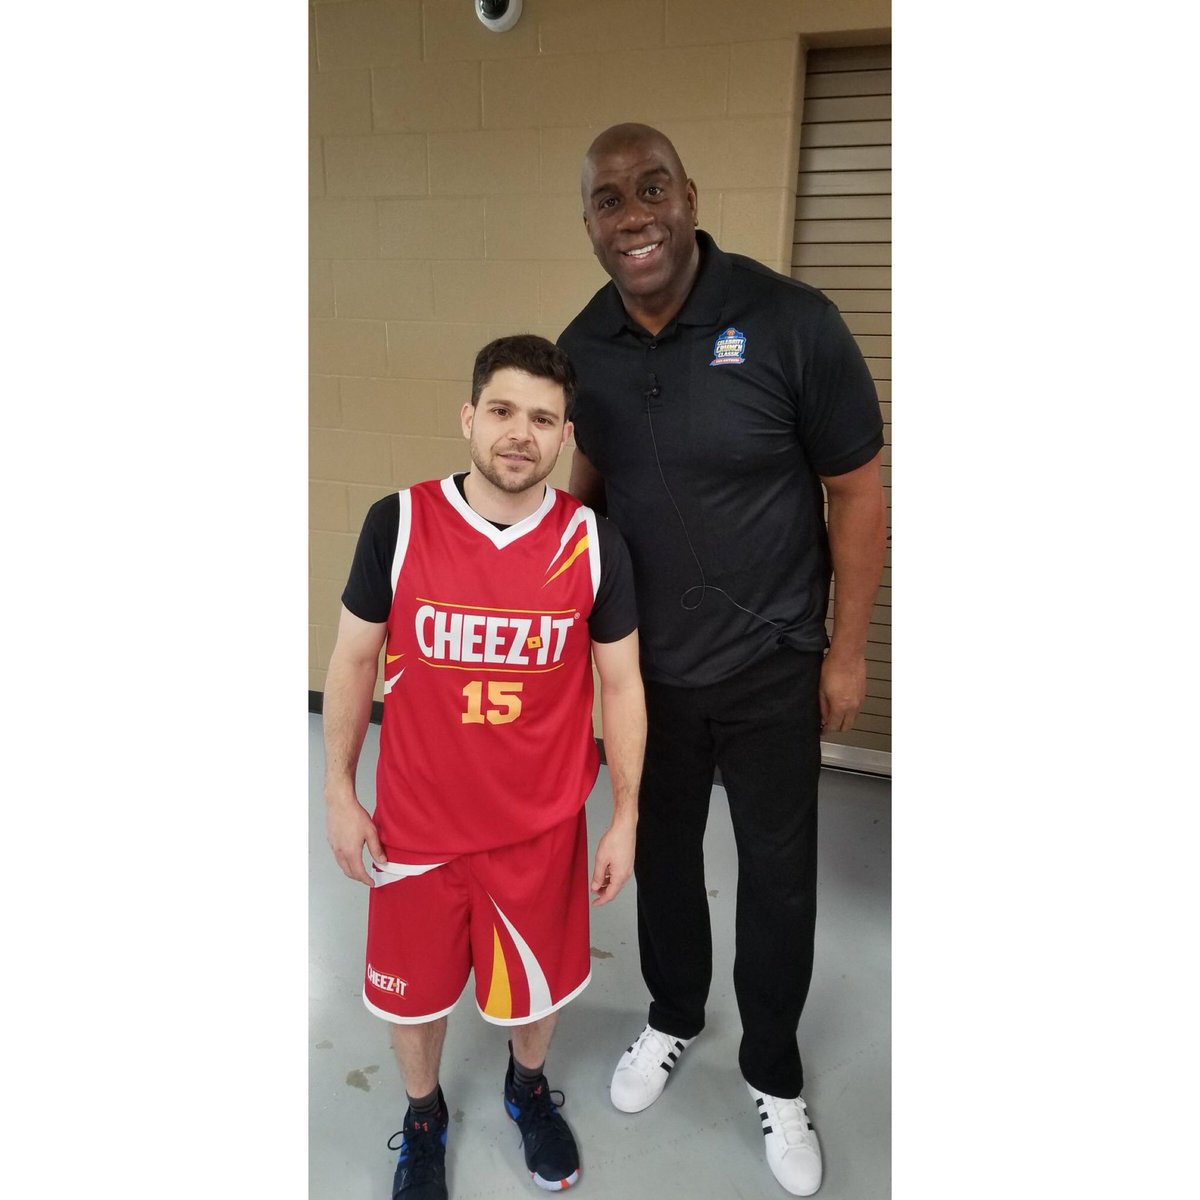 RT @MagicJohnson: I'm so proud of my team, Team @cheezit, for beating coach @Shaq and Team Pringles. https://t.co/XKNBJ3T1t5